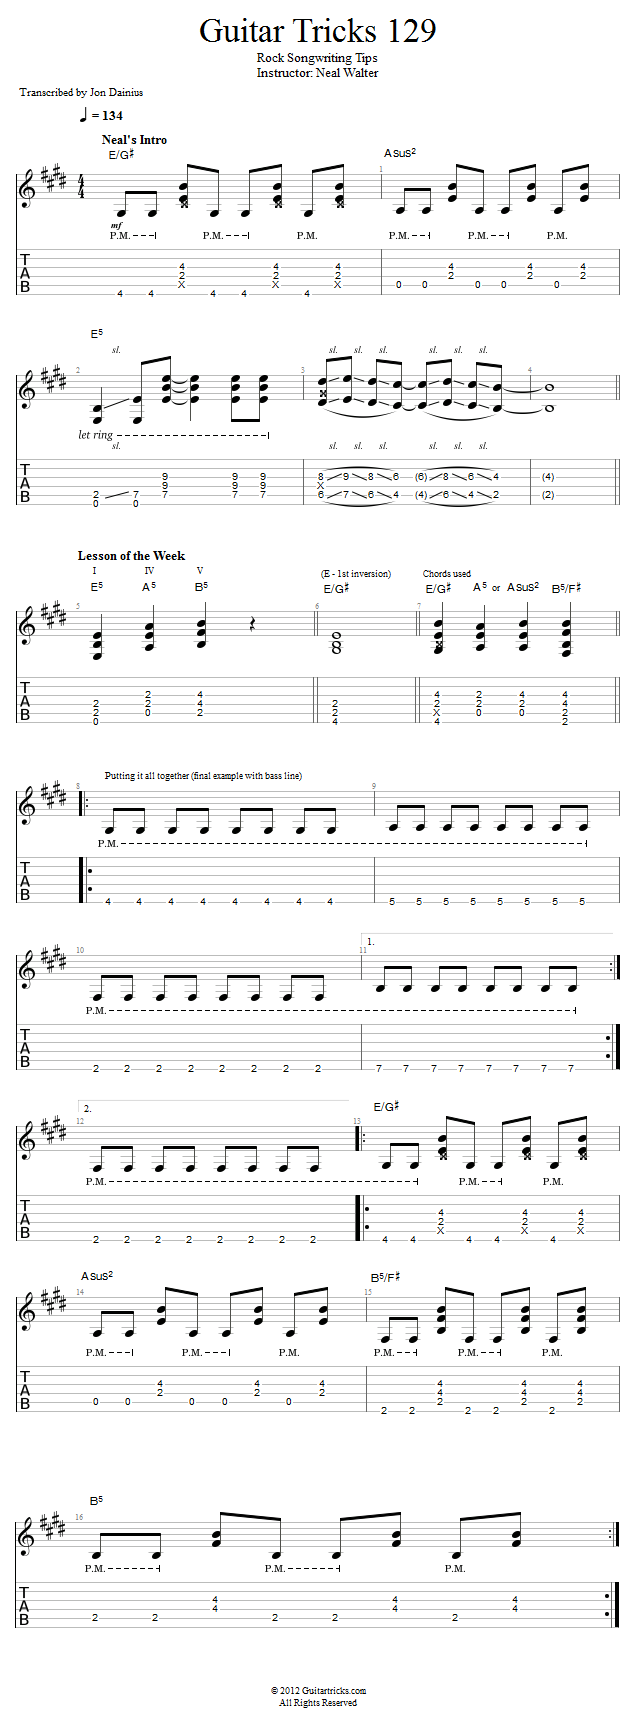 Guitar Tricks 129: Rock Songwriting Tips song notation